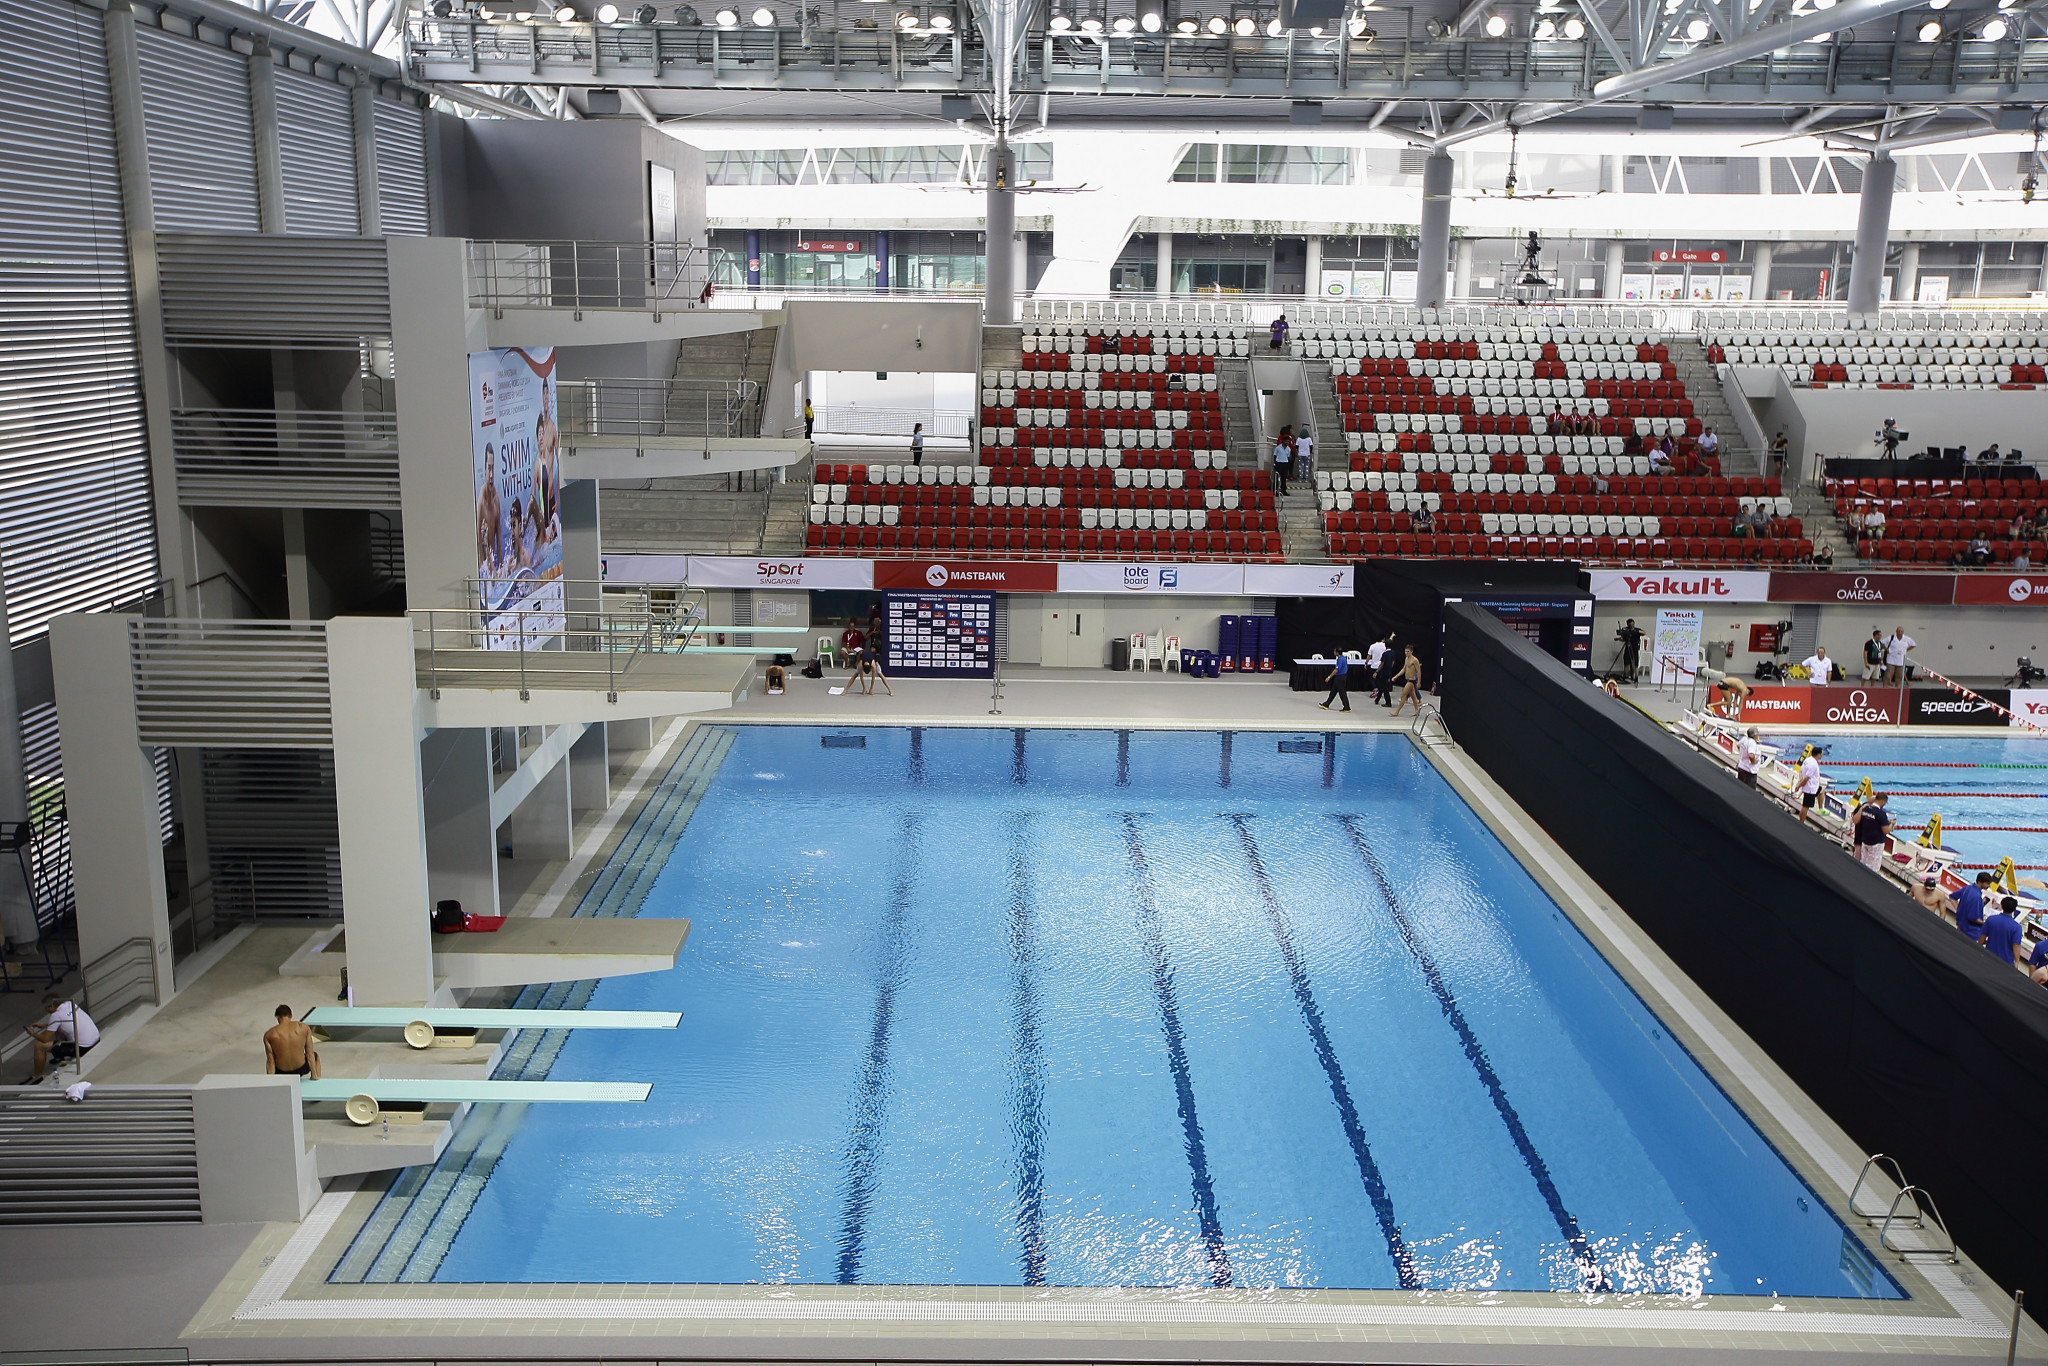 The OCBC Aquatic Centre will play host to the last leg of the 2019 FINA Diving Grand Prix series this weekend ©Getty Images